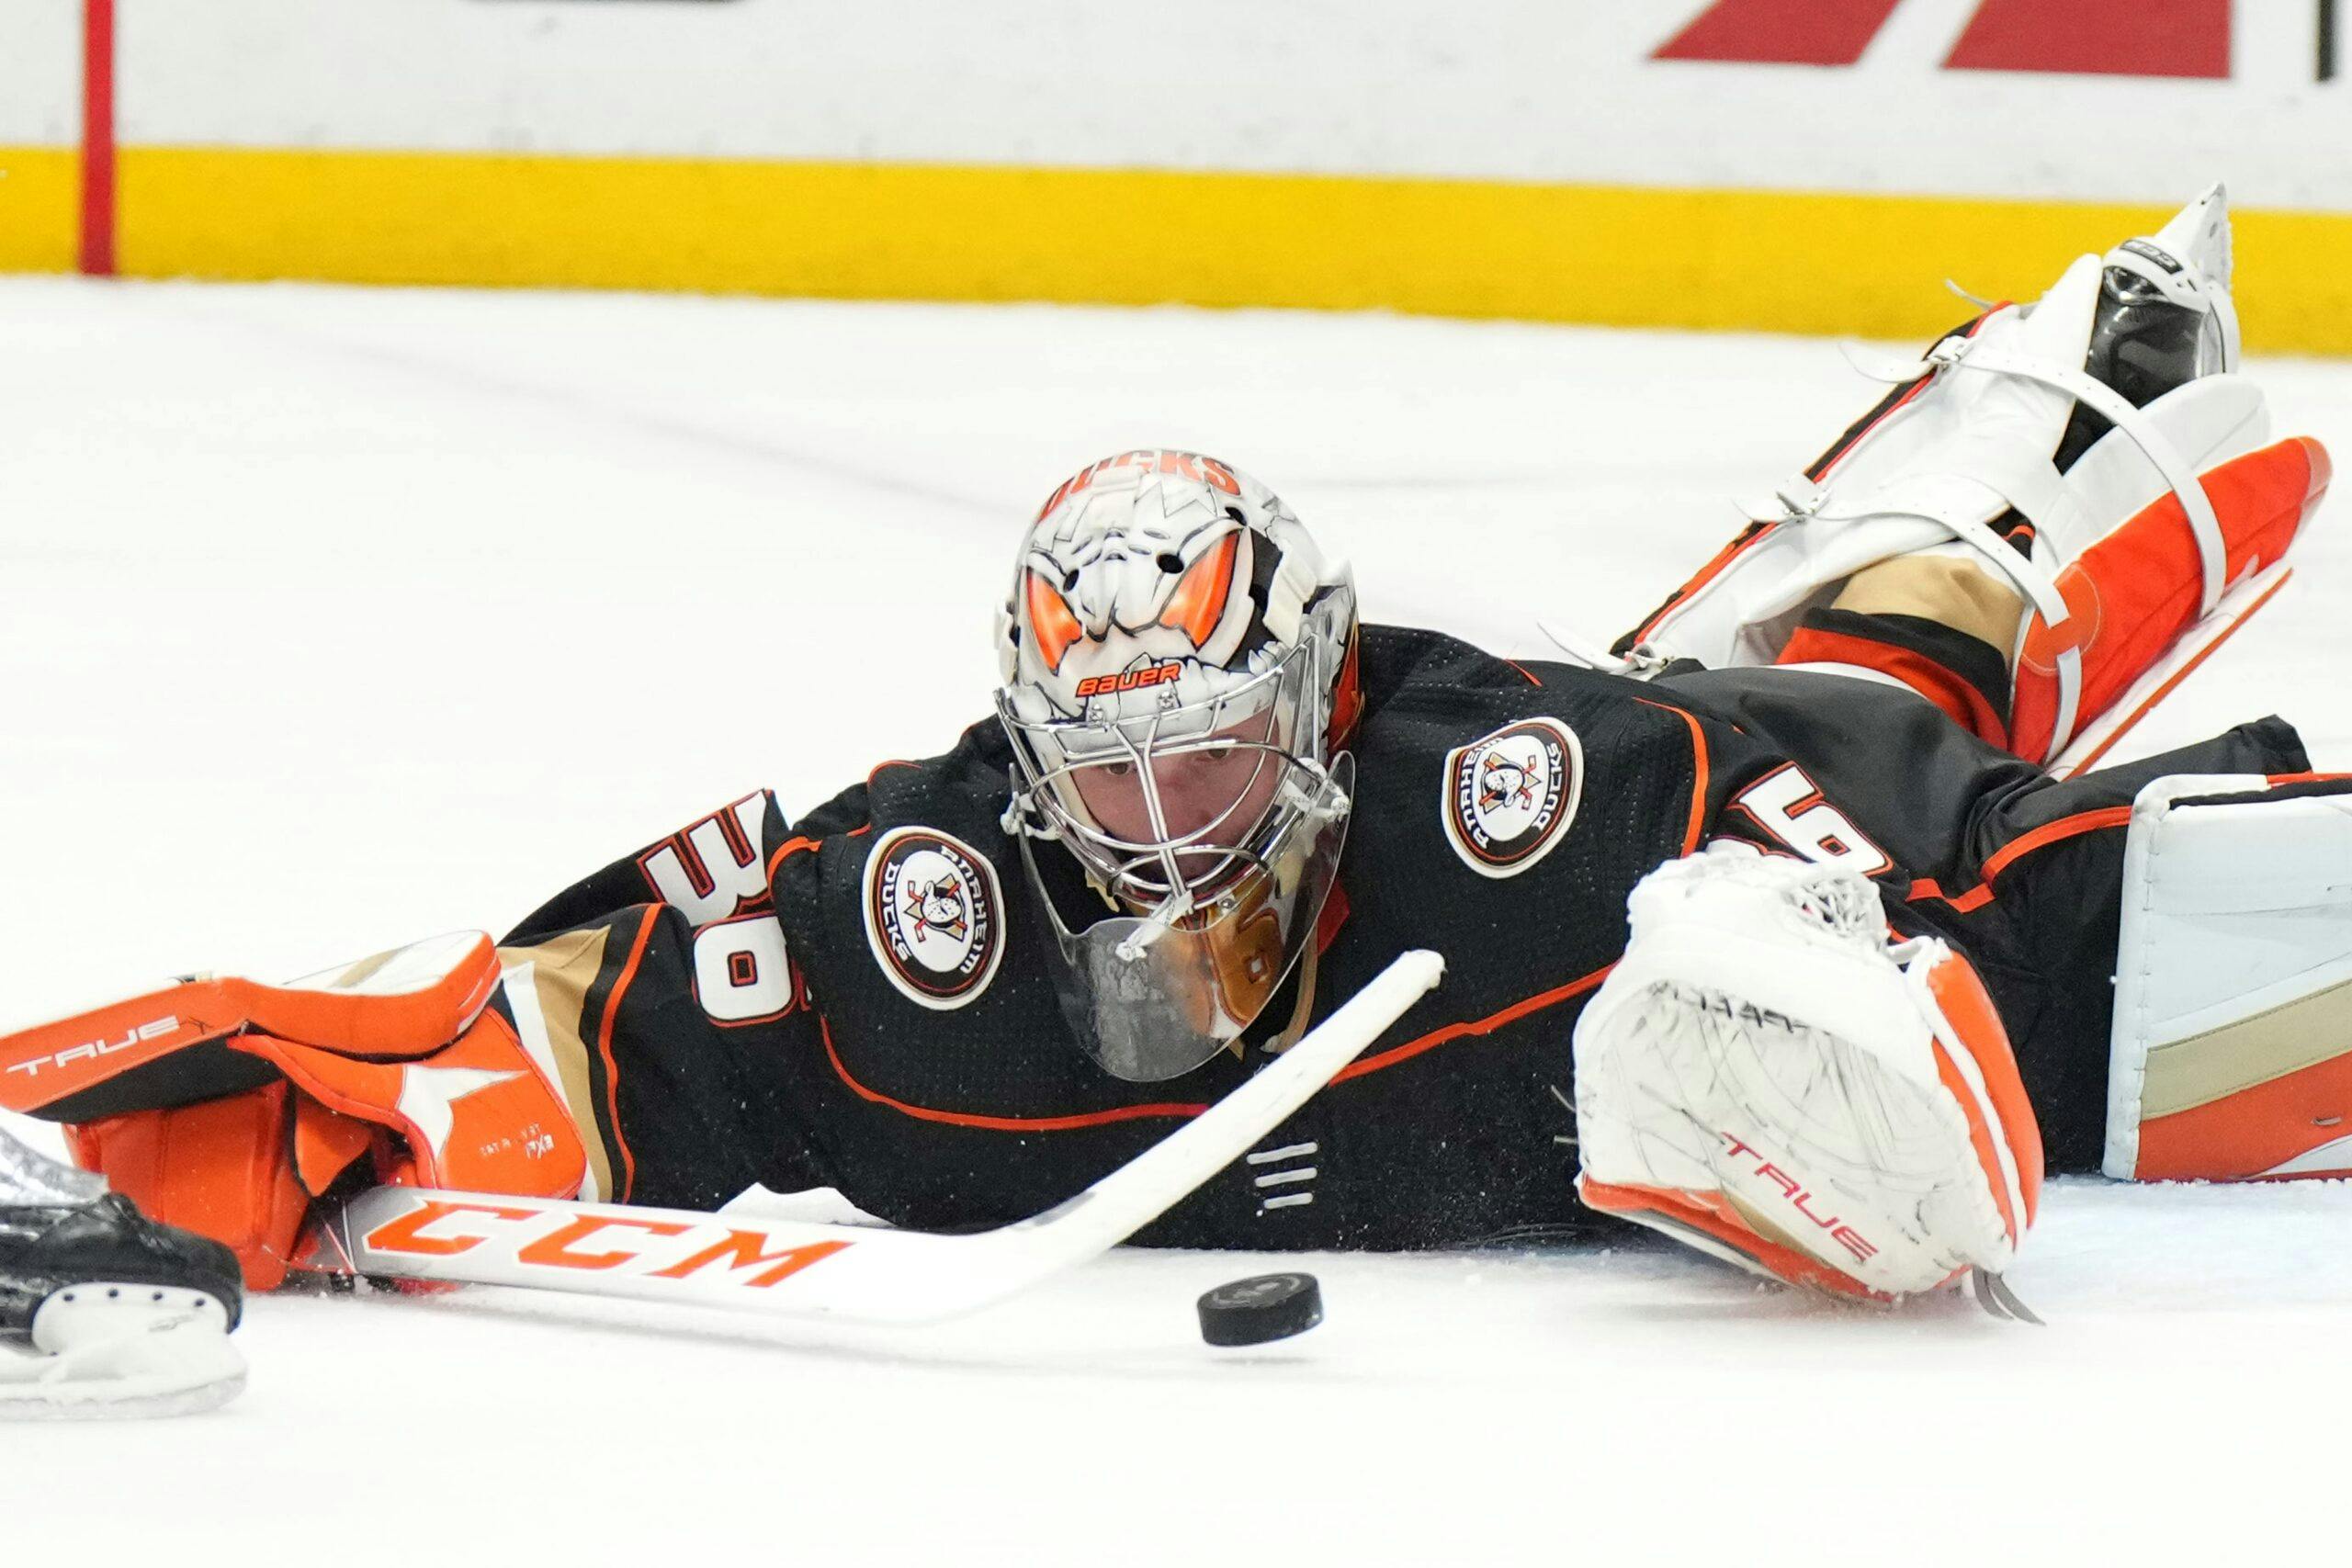 NHL - Going to need to make room for the Anaheim Ducks